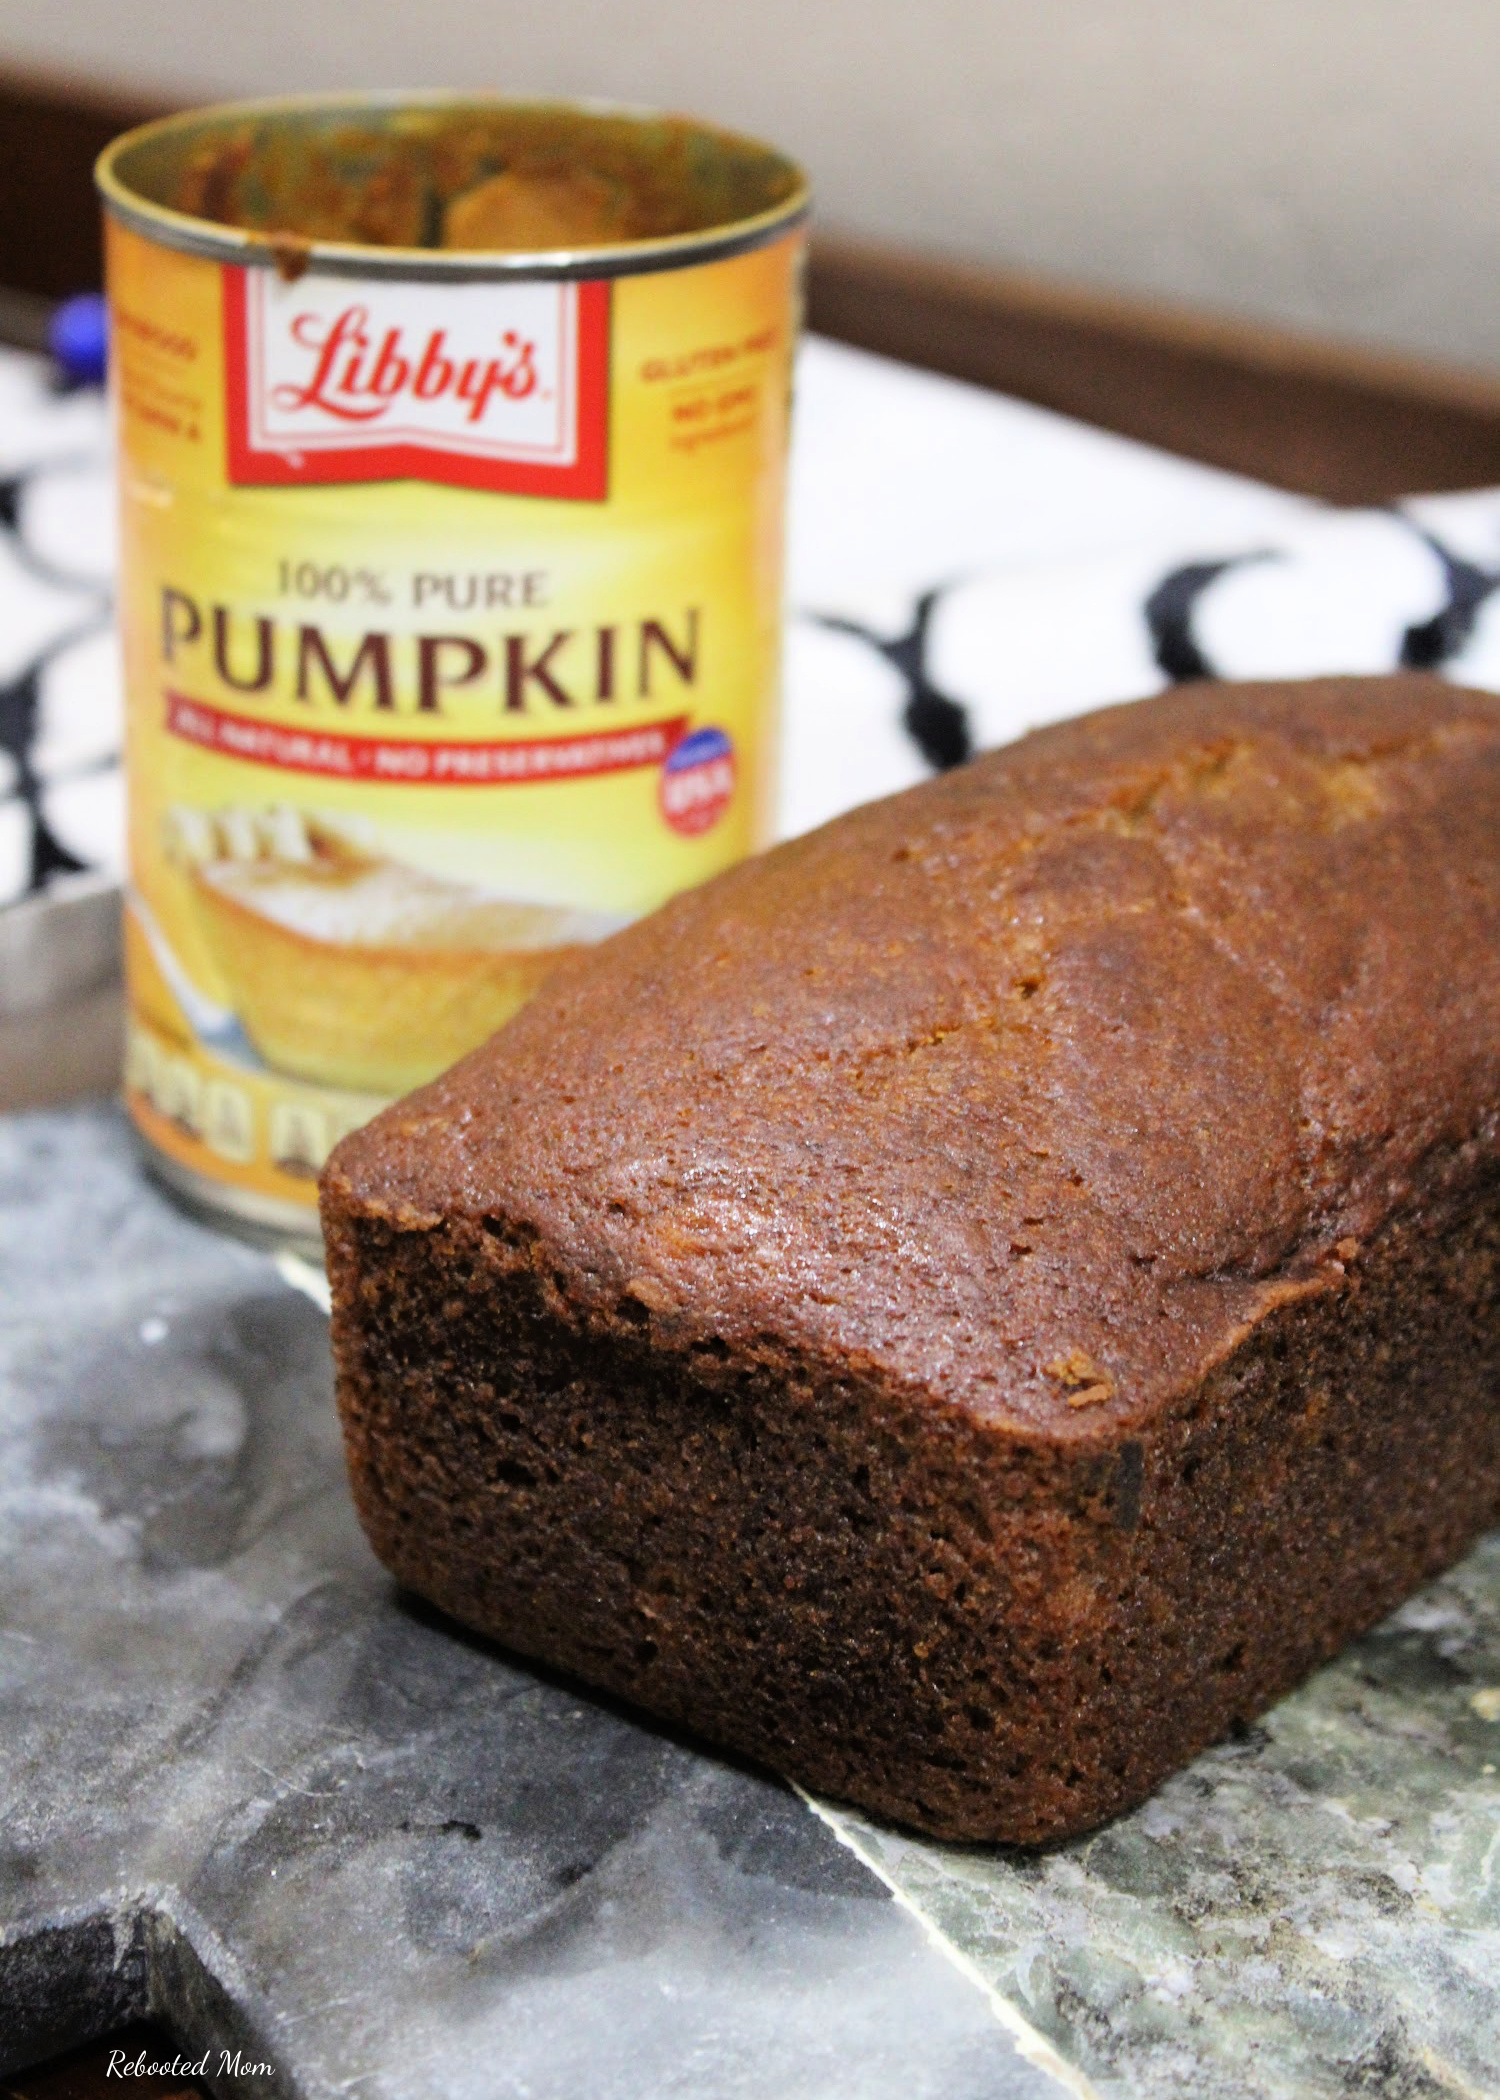 Pineapple Pumpkin Bread brings together flavorful pineapple and canned pumpkin for a super moist, rich, decadent loaf that is super easy to make and even better enjoyed!